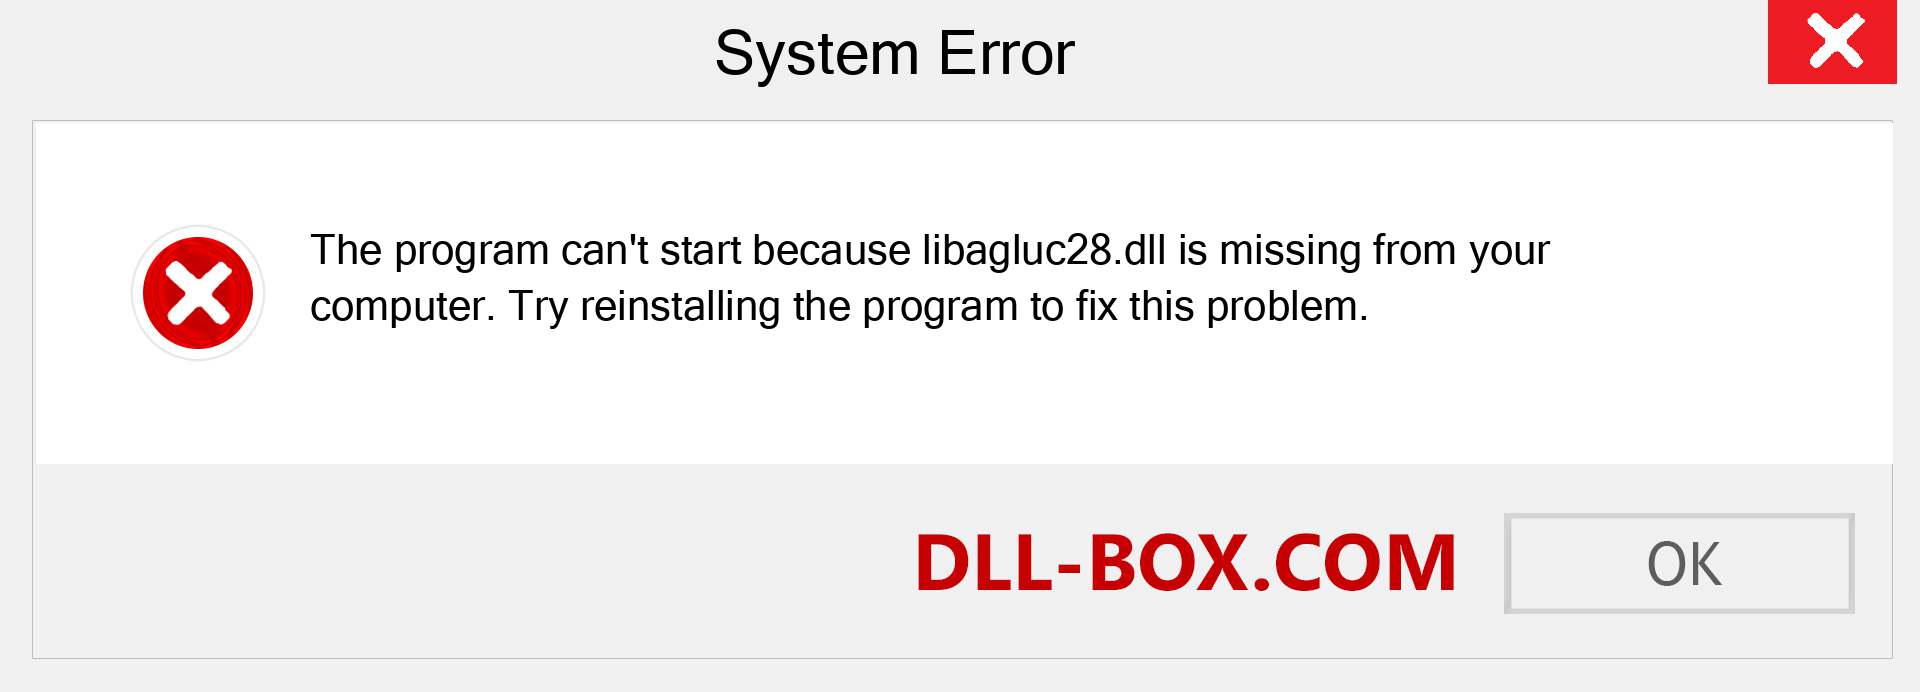  libagluc28.dll file is missing?. Download for Windows 7, 8, 10 - Fix  libagluc28 dll Missing Error on Windows, photos, images